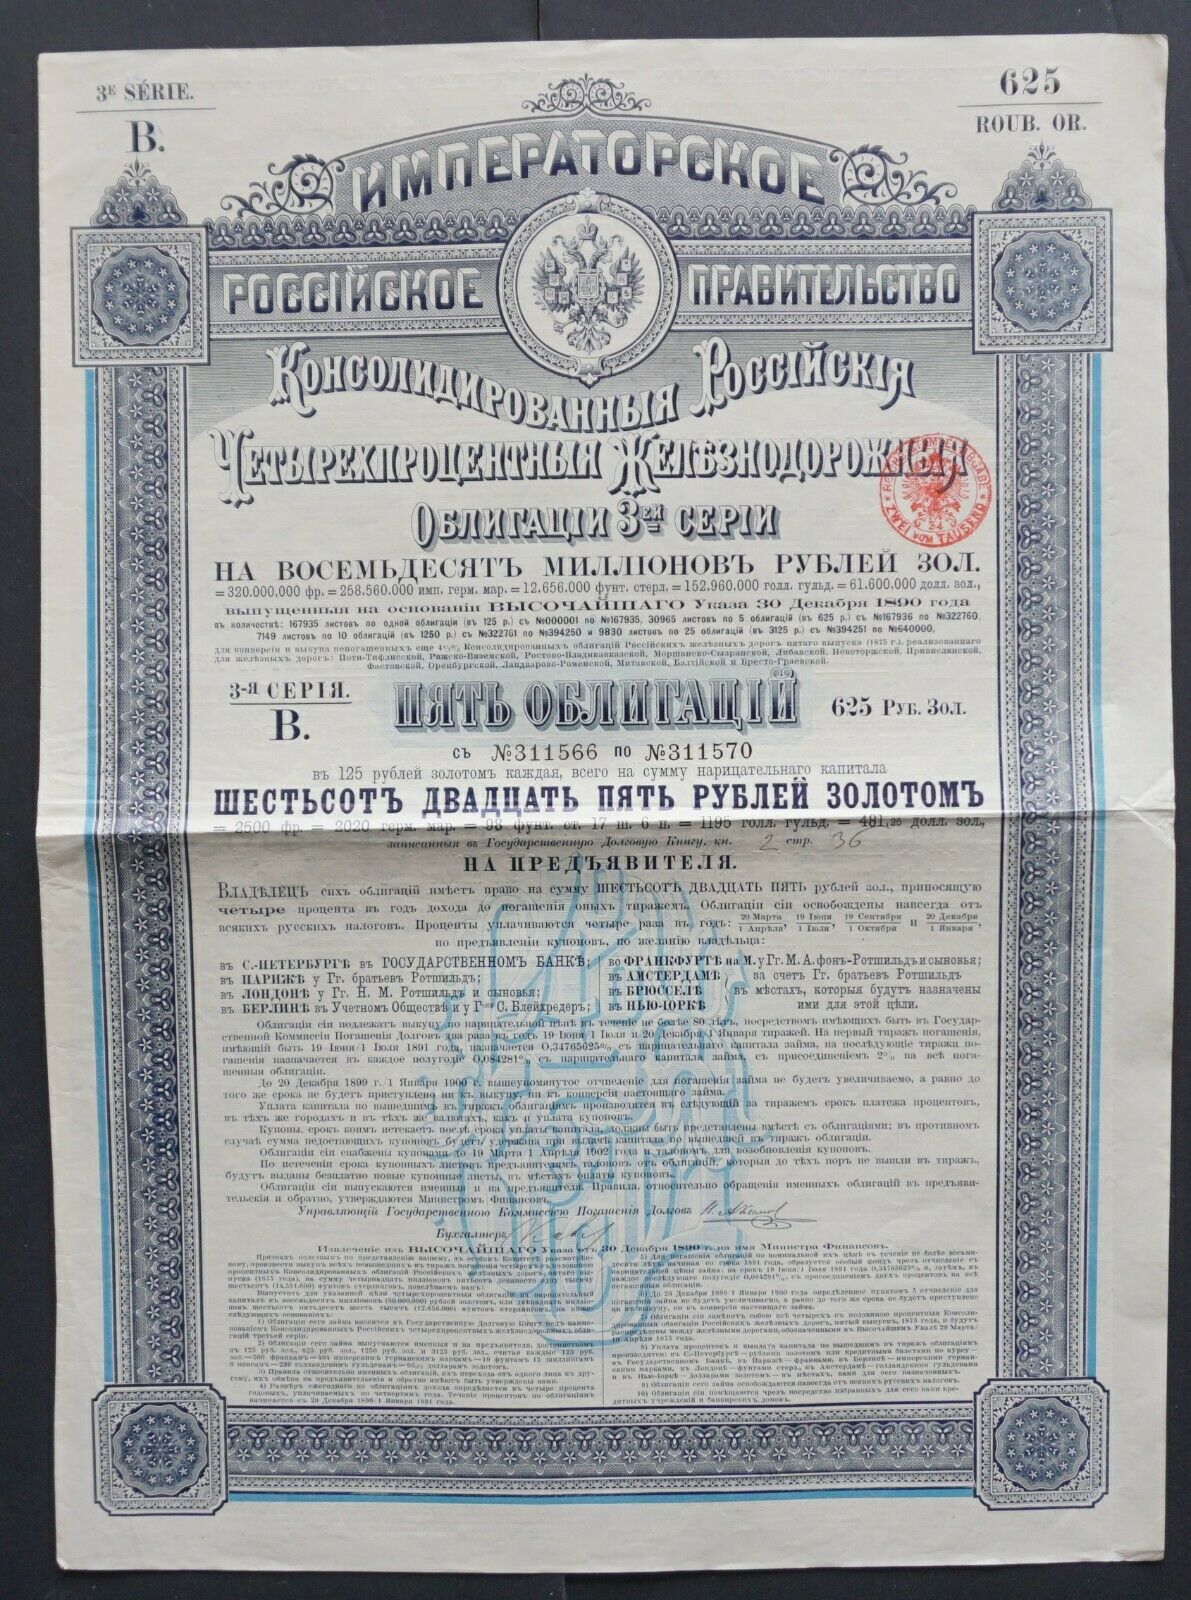 Russia - Consolidated Russian Railroad -3rd Serie-4% Gold Bond-1890- 625 Rb